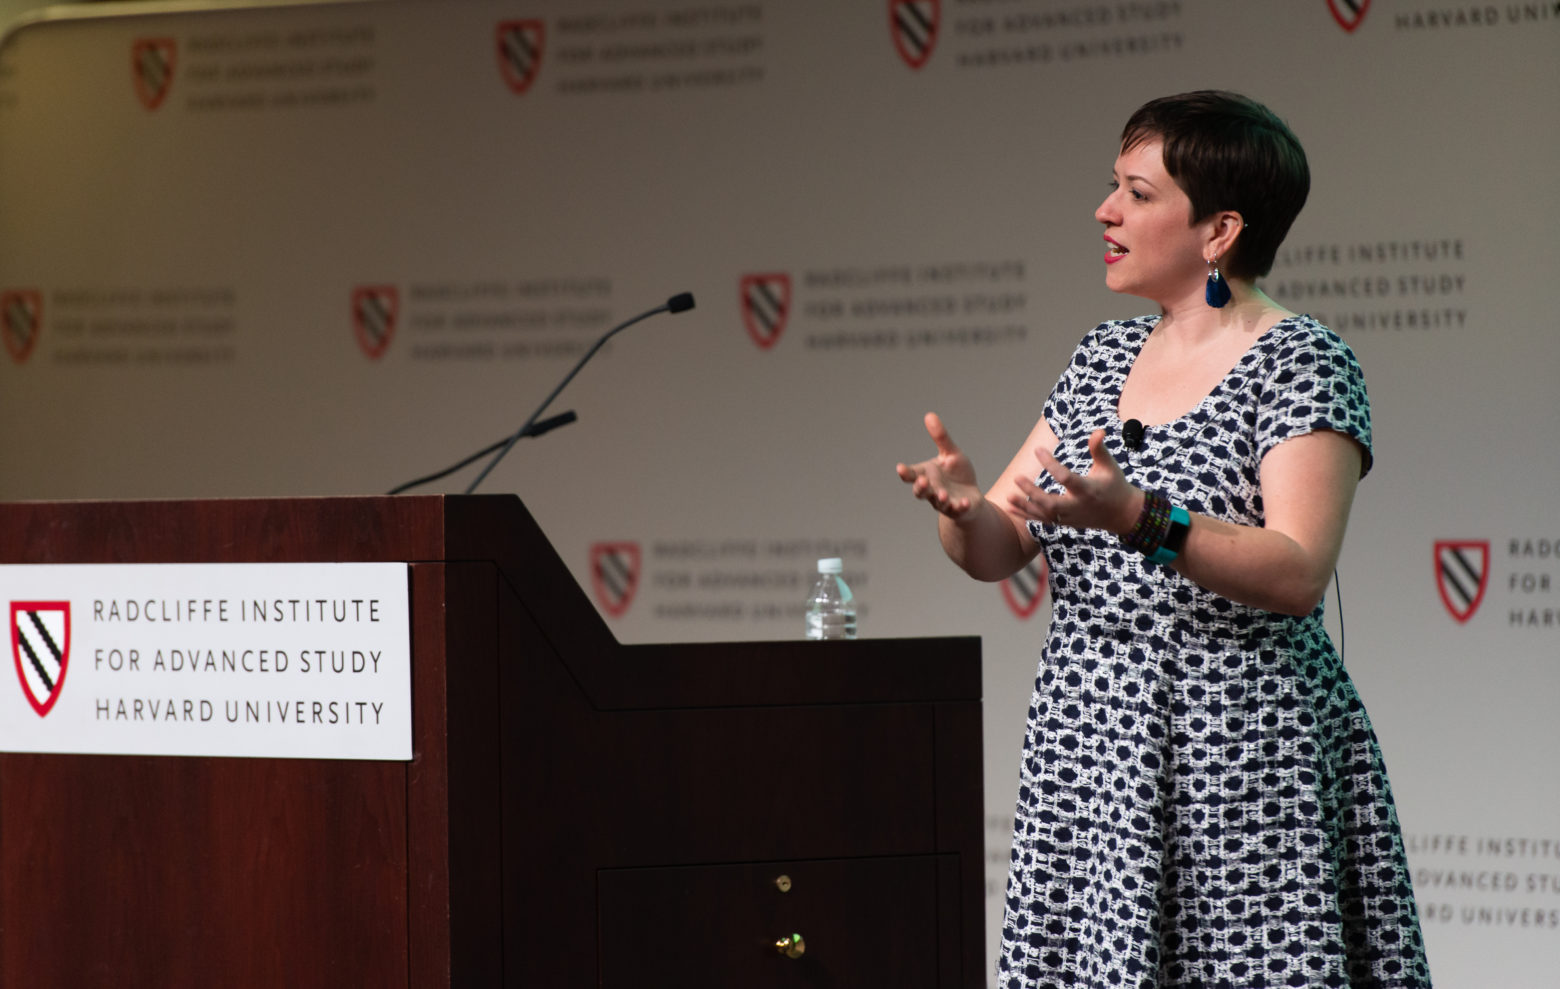 Credit: Kevin Grady/Radcliffe Institute